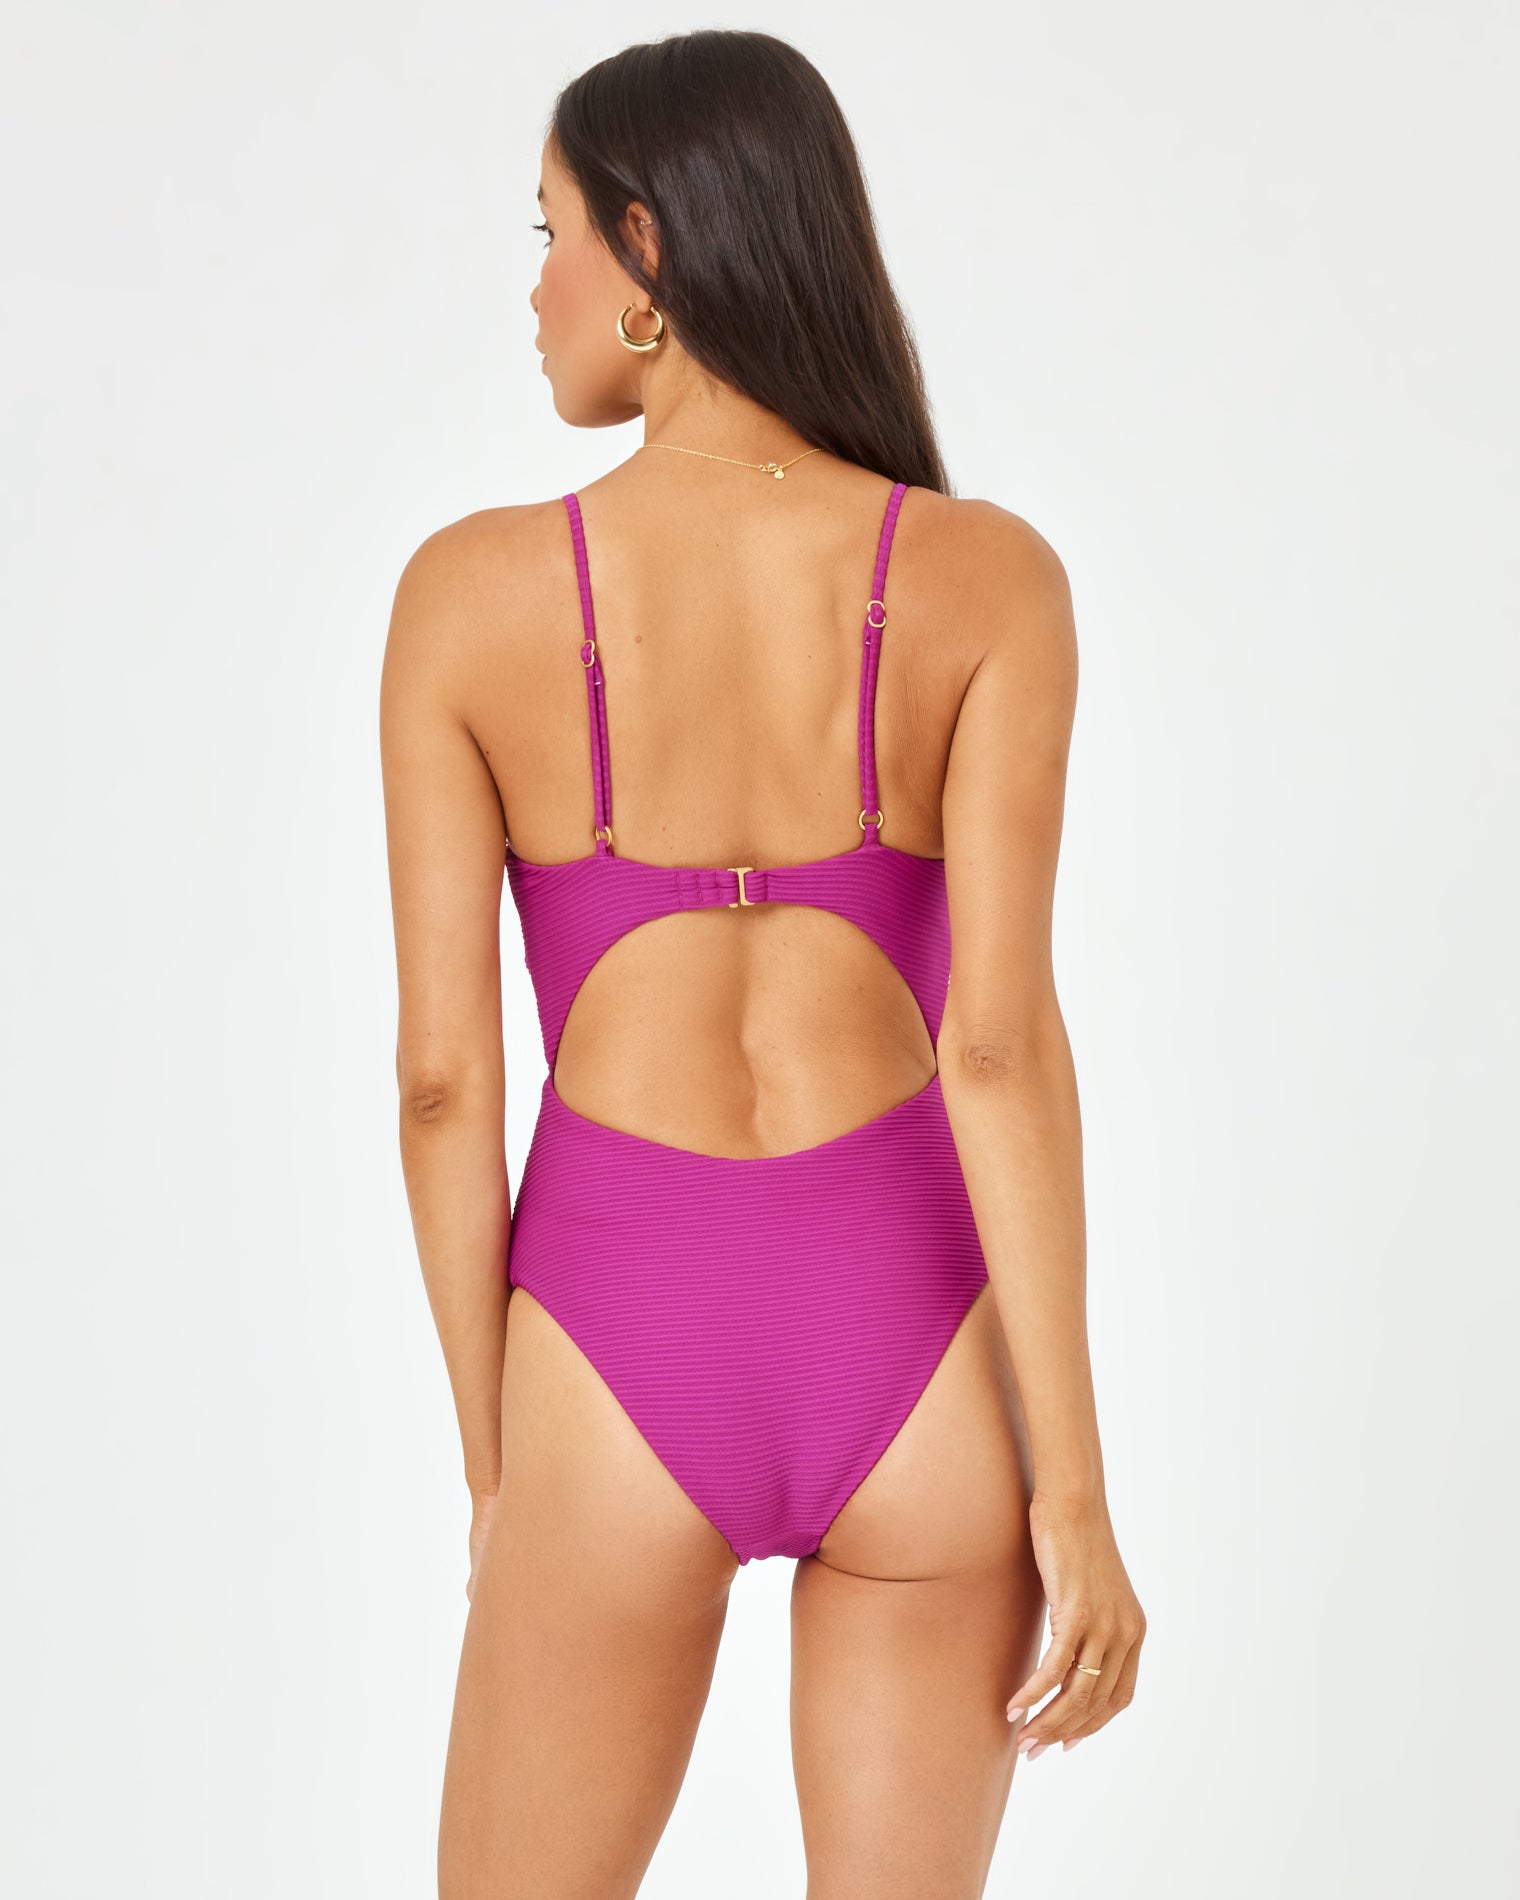 Eco Chic Repreve® Kyslee One Piece Swimsuit - Berry Berry | Model: Emily (size: S)